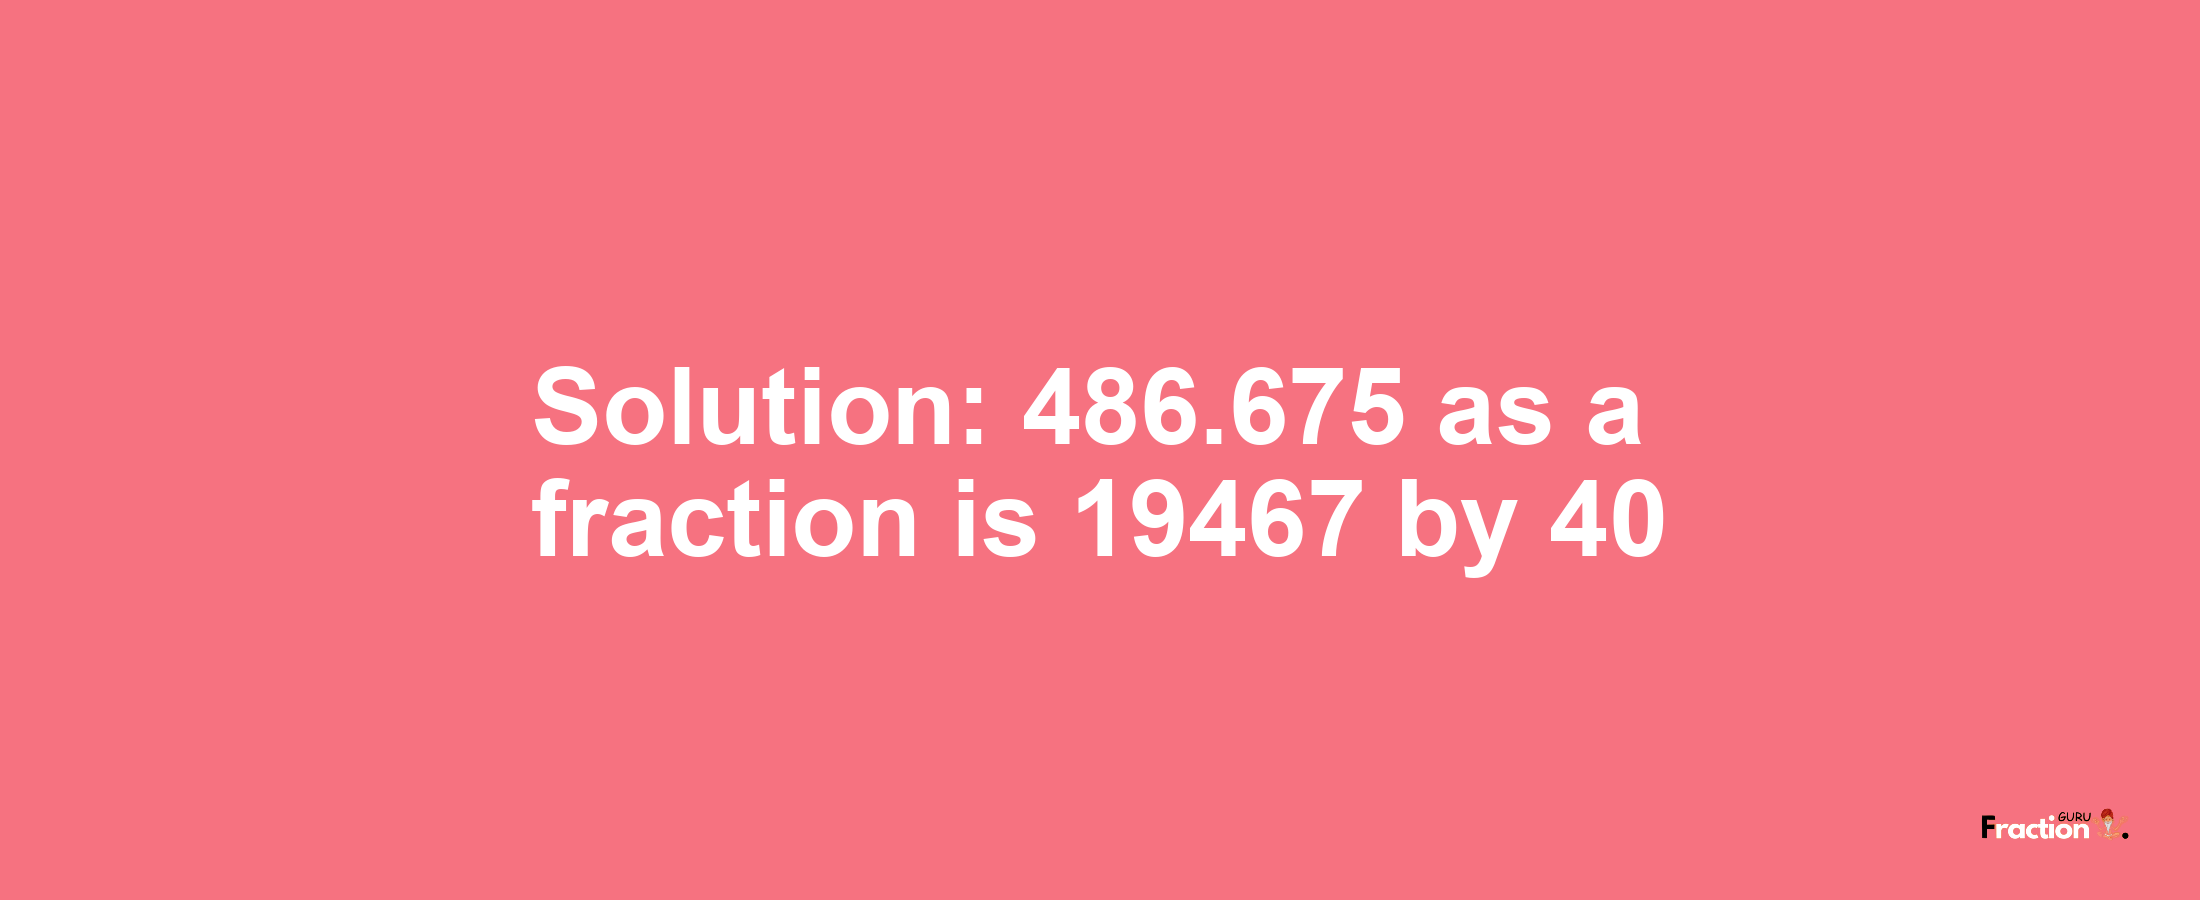 Solution:486.675 as a fraction is 19467/40